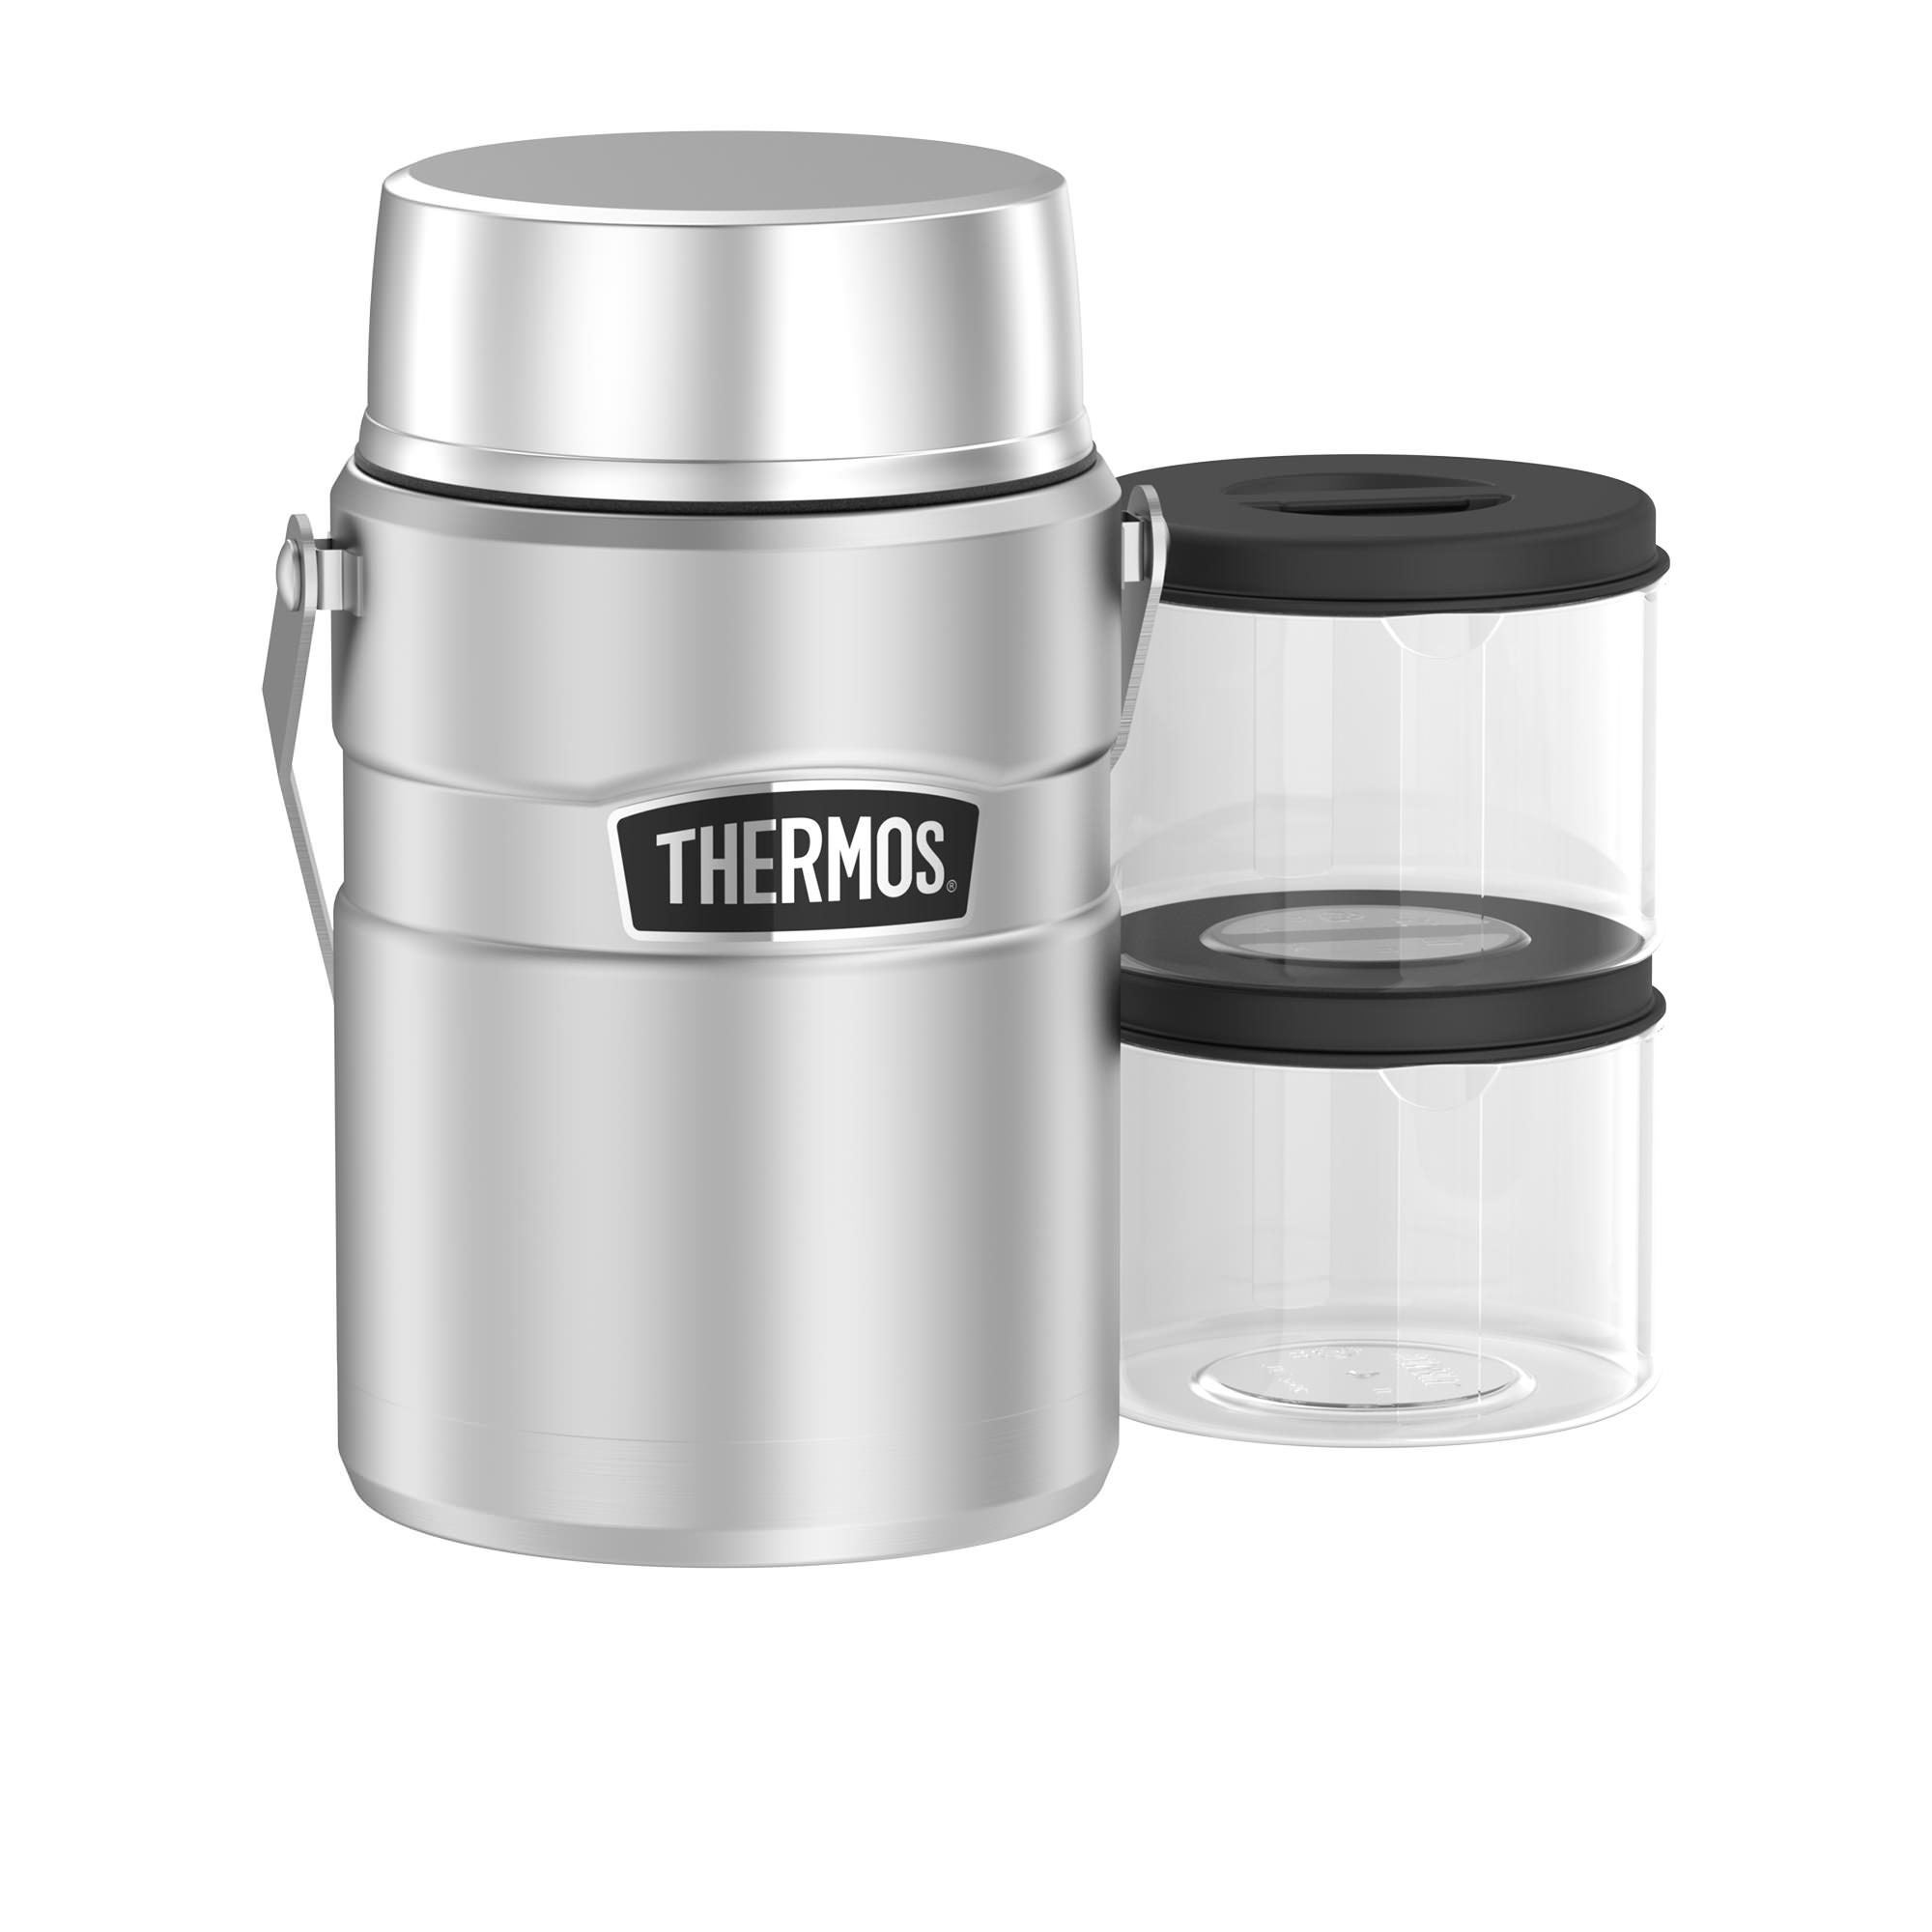 Thermos Stainless King Big Boss Food Jar 1.39L Stainless Steel Image 1